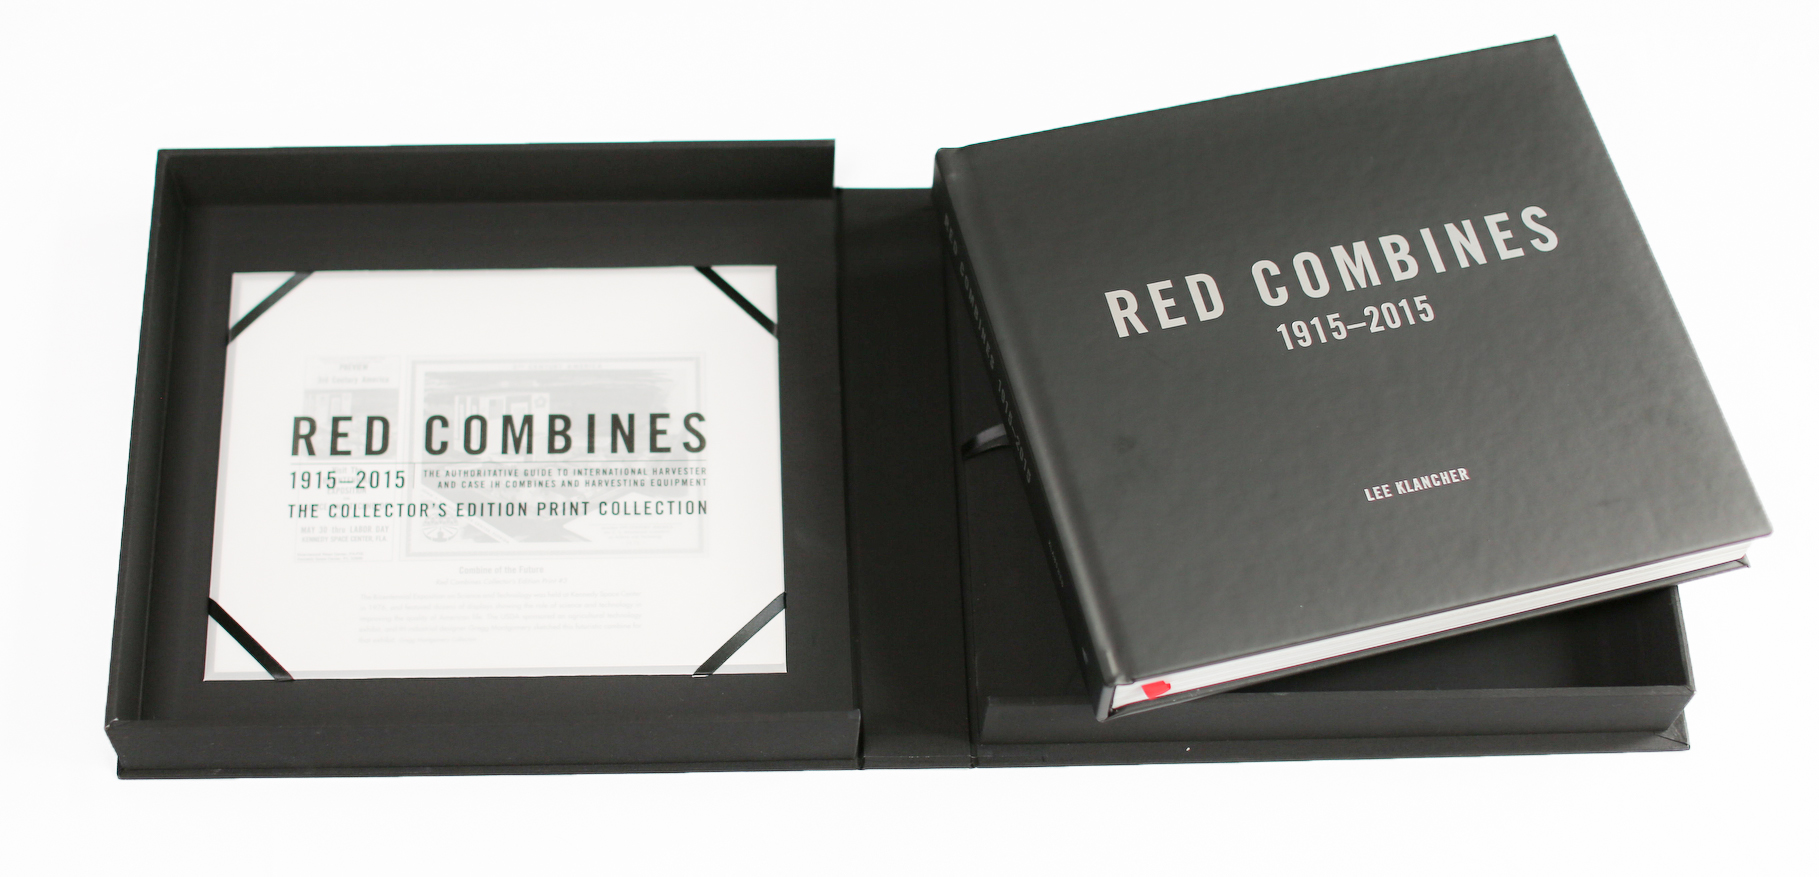 Photo of Red Combines Collectors Edition Leatherbound book in case